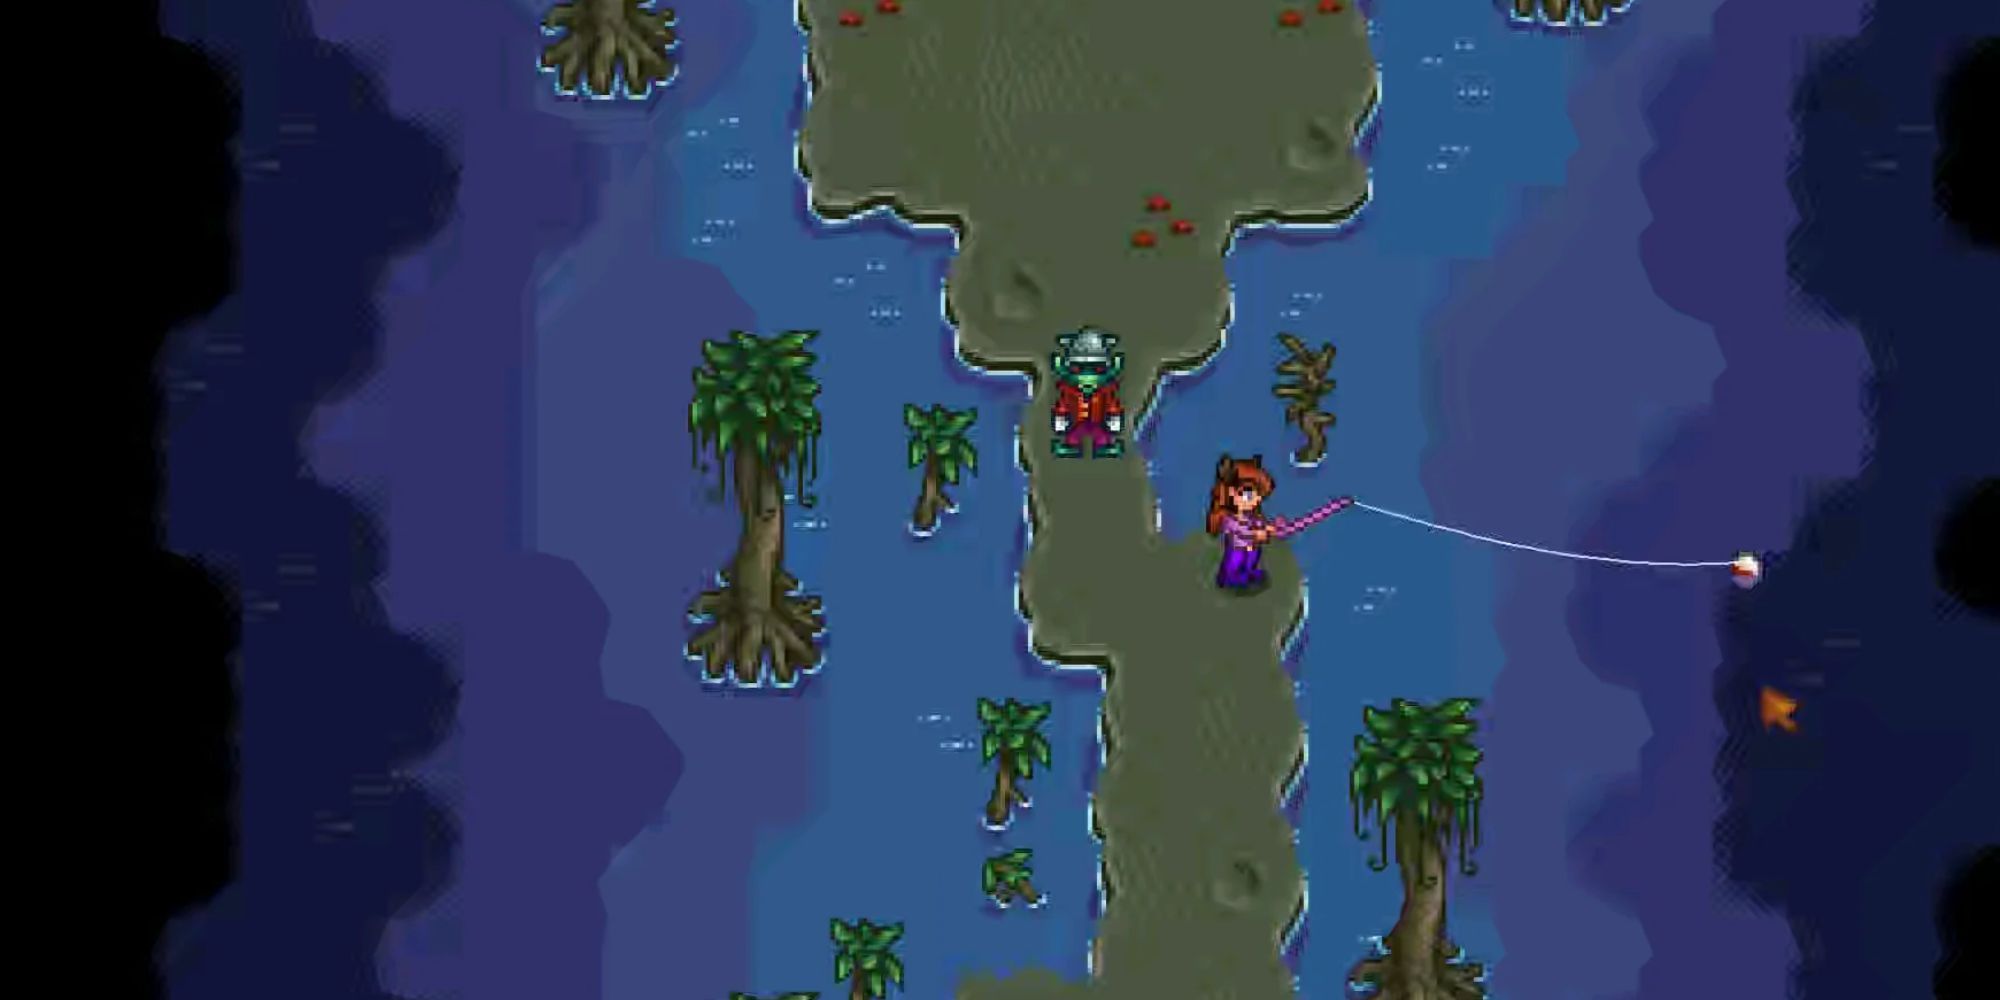 Stardew Valley player fishing in the Witch's Swamp